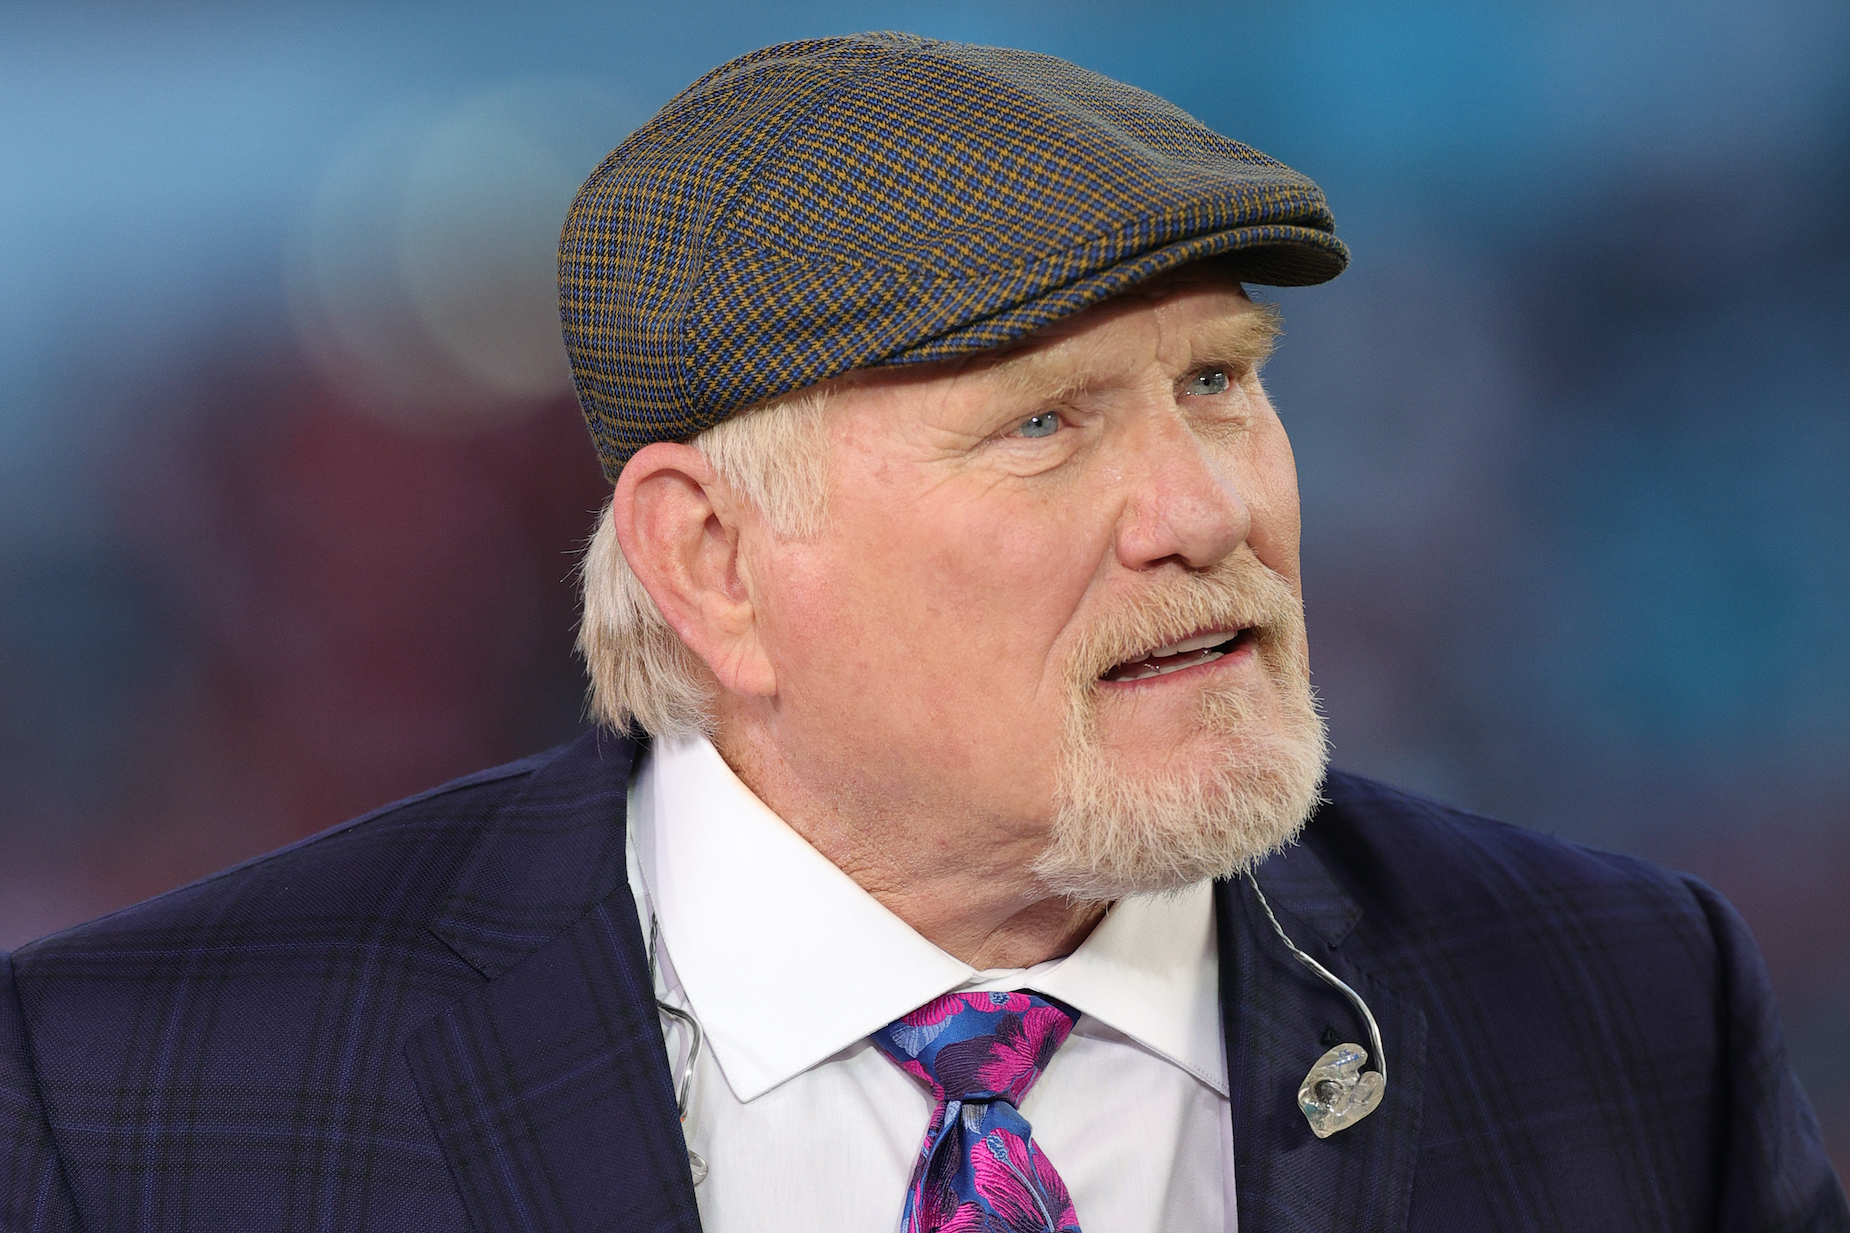 Terry Bradshaw had to apologize after making an insensitive comment about Ken Jeong.